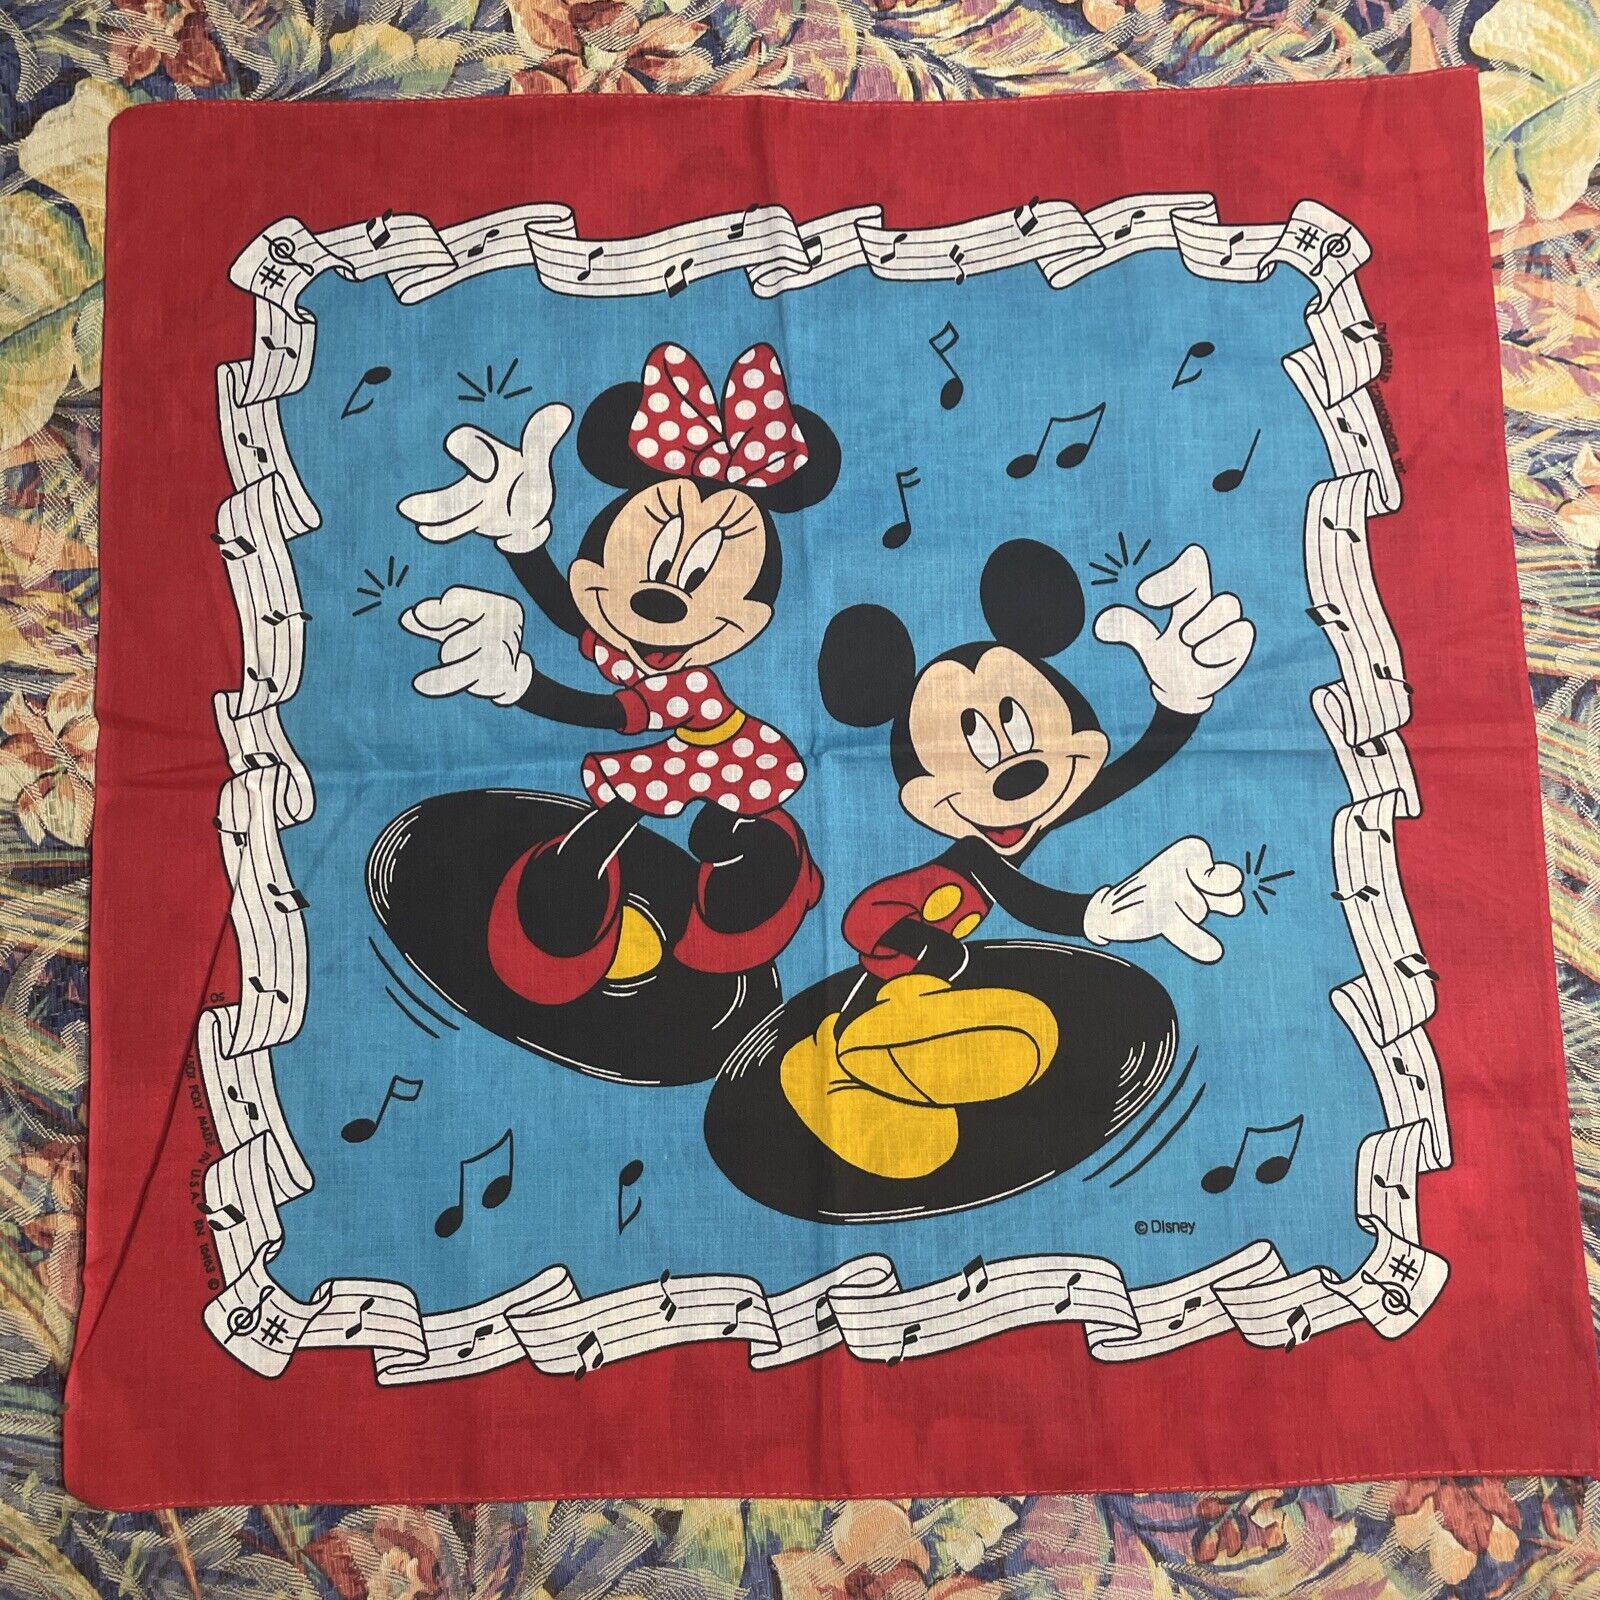 Vintage Disney Mickey & Minnie Mouse Bandanna Woronowicz Dancing On Records